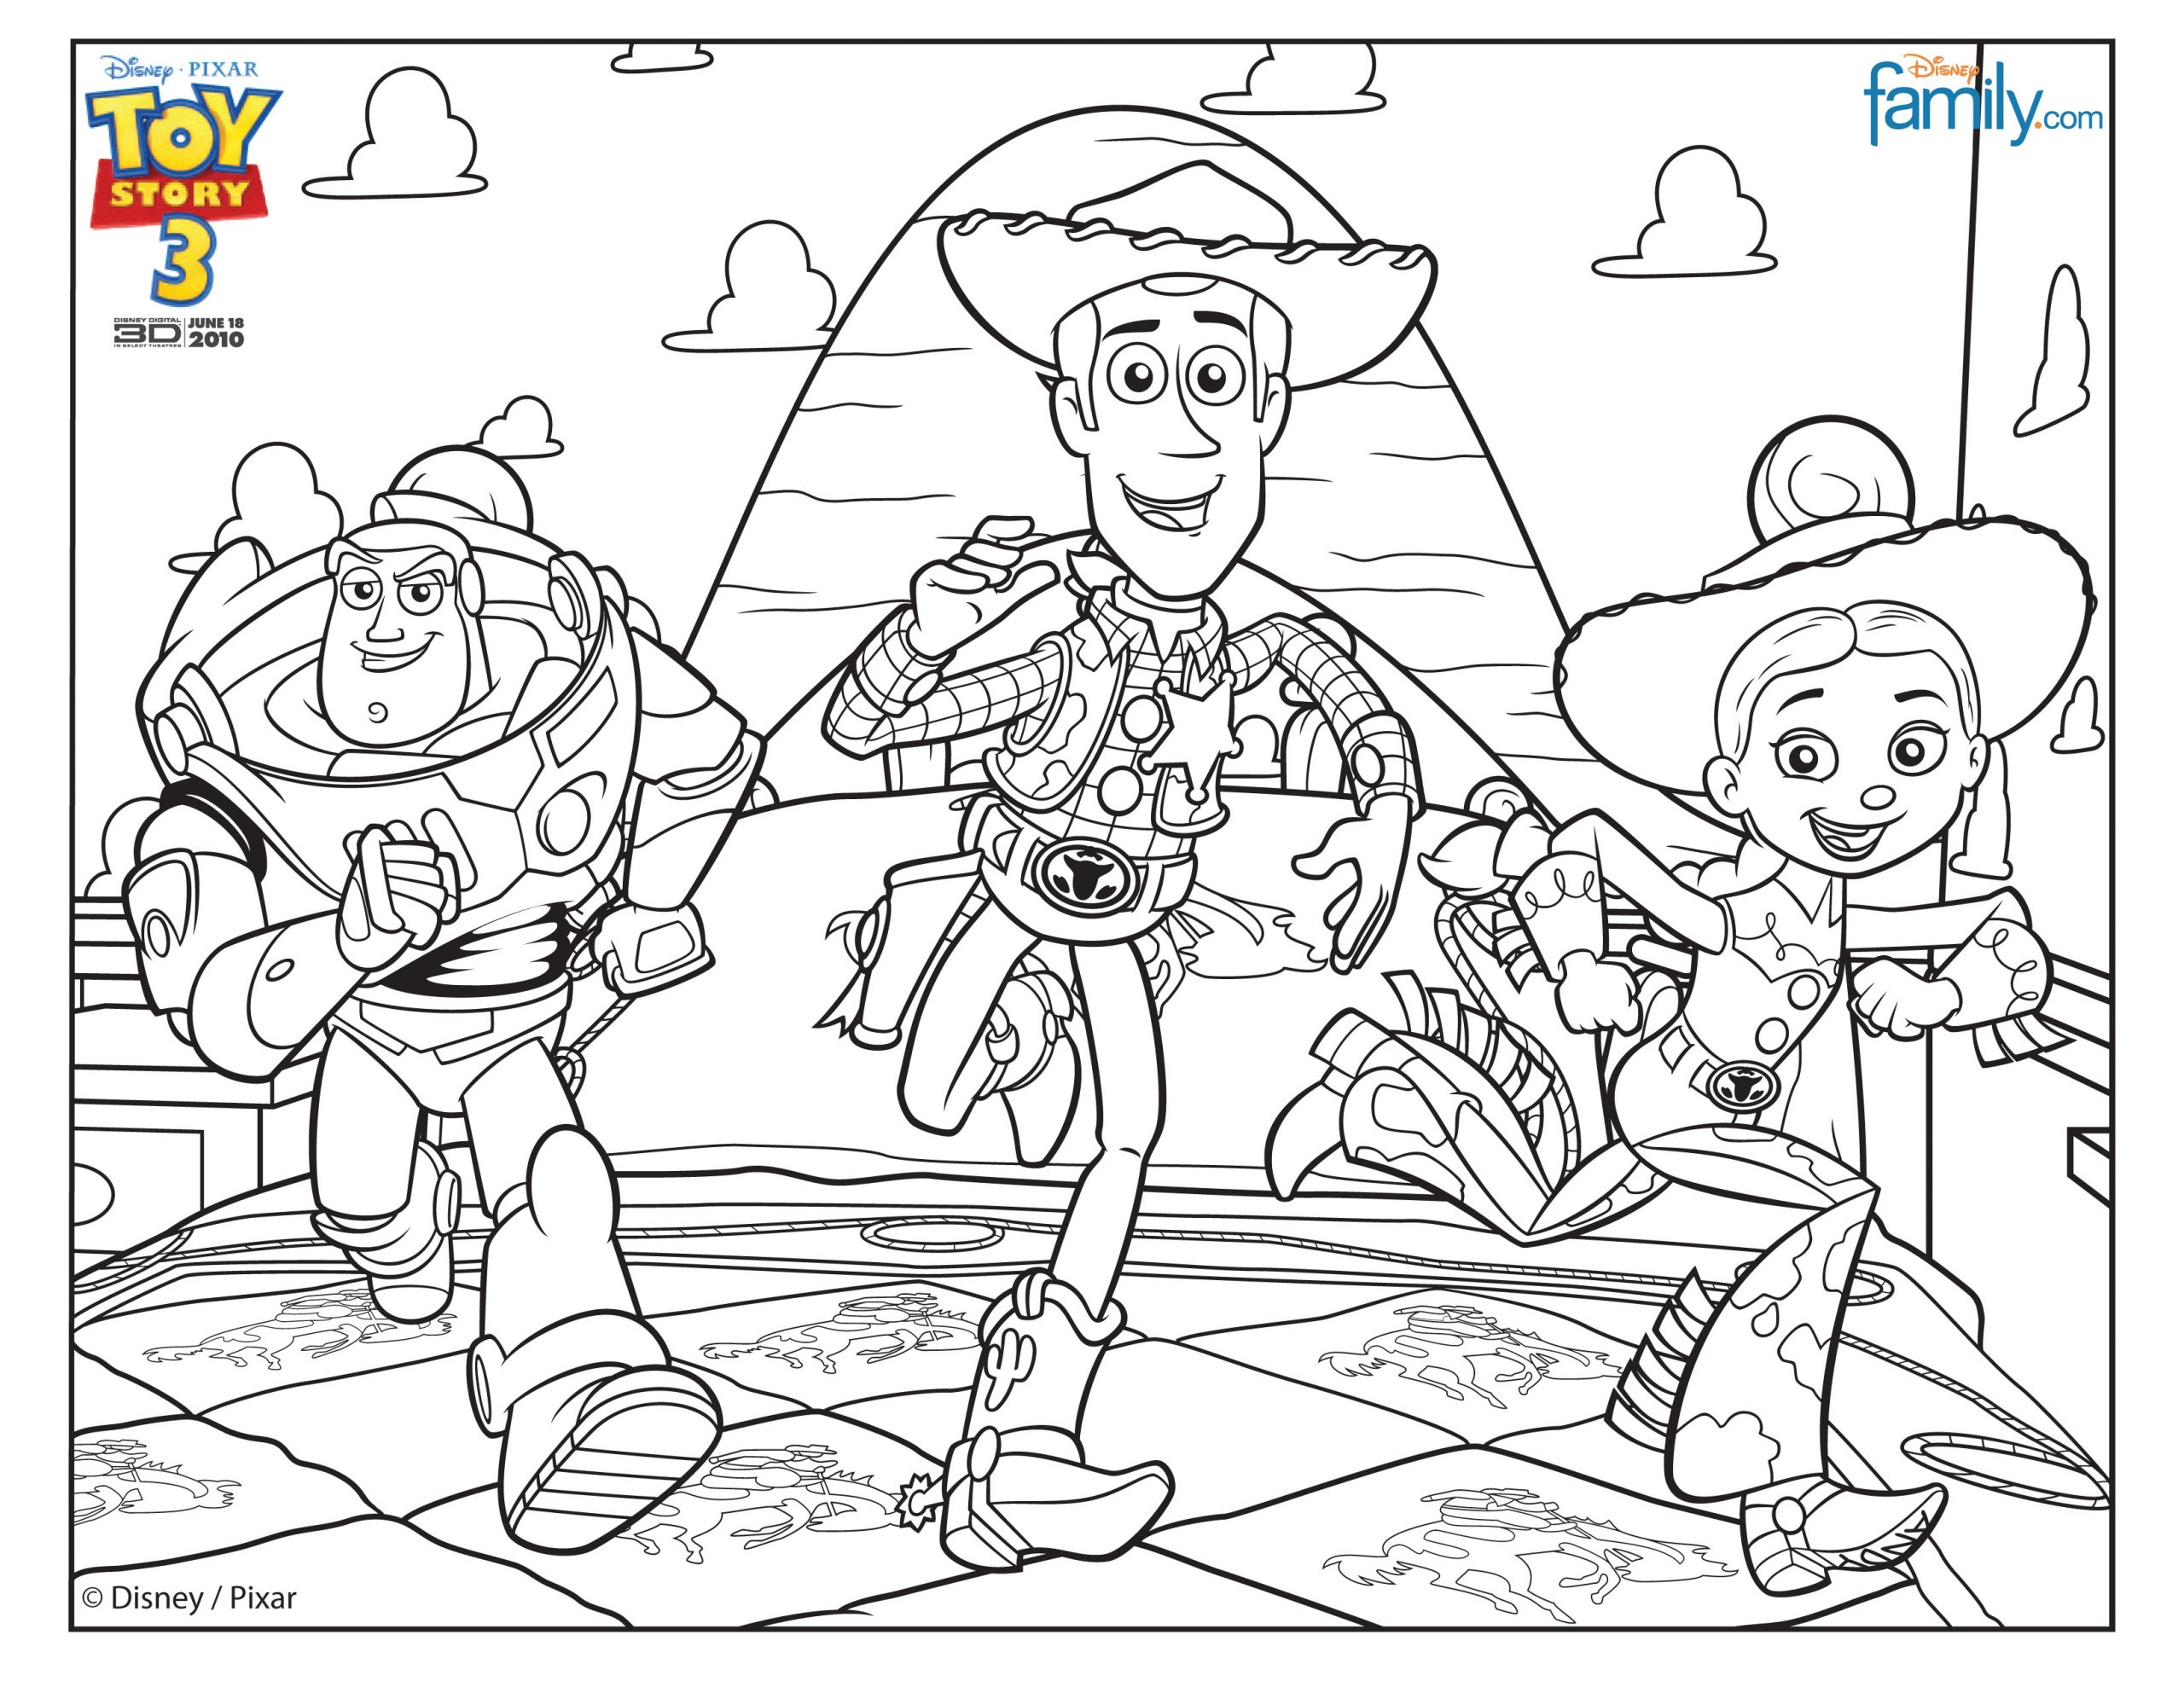 Coloriage Fr: Coloriage A Imprimer Toy Story 3 Gratuit innen Woody Coloriage A Imprimer